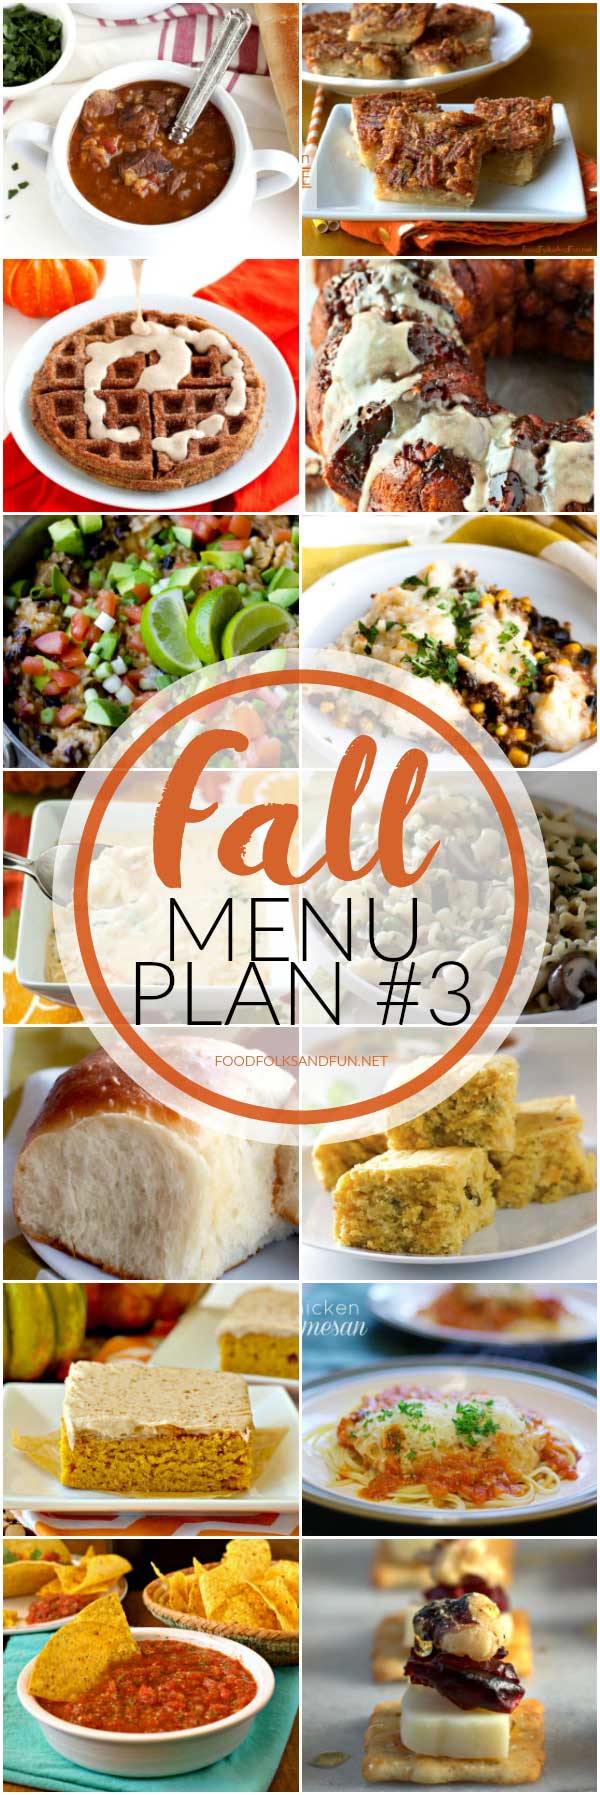 Fall-themed dinner recipes in a collage with text overlay for Pinterest